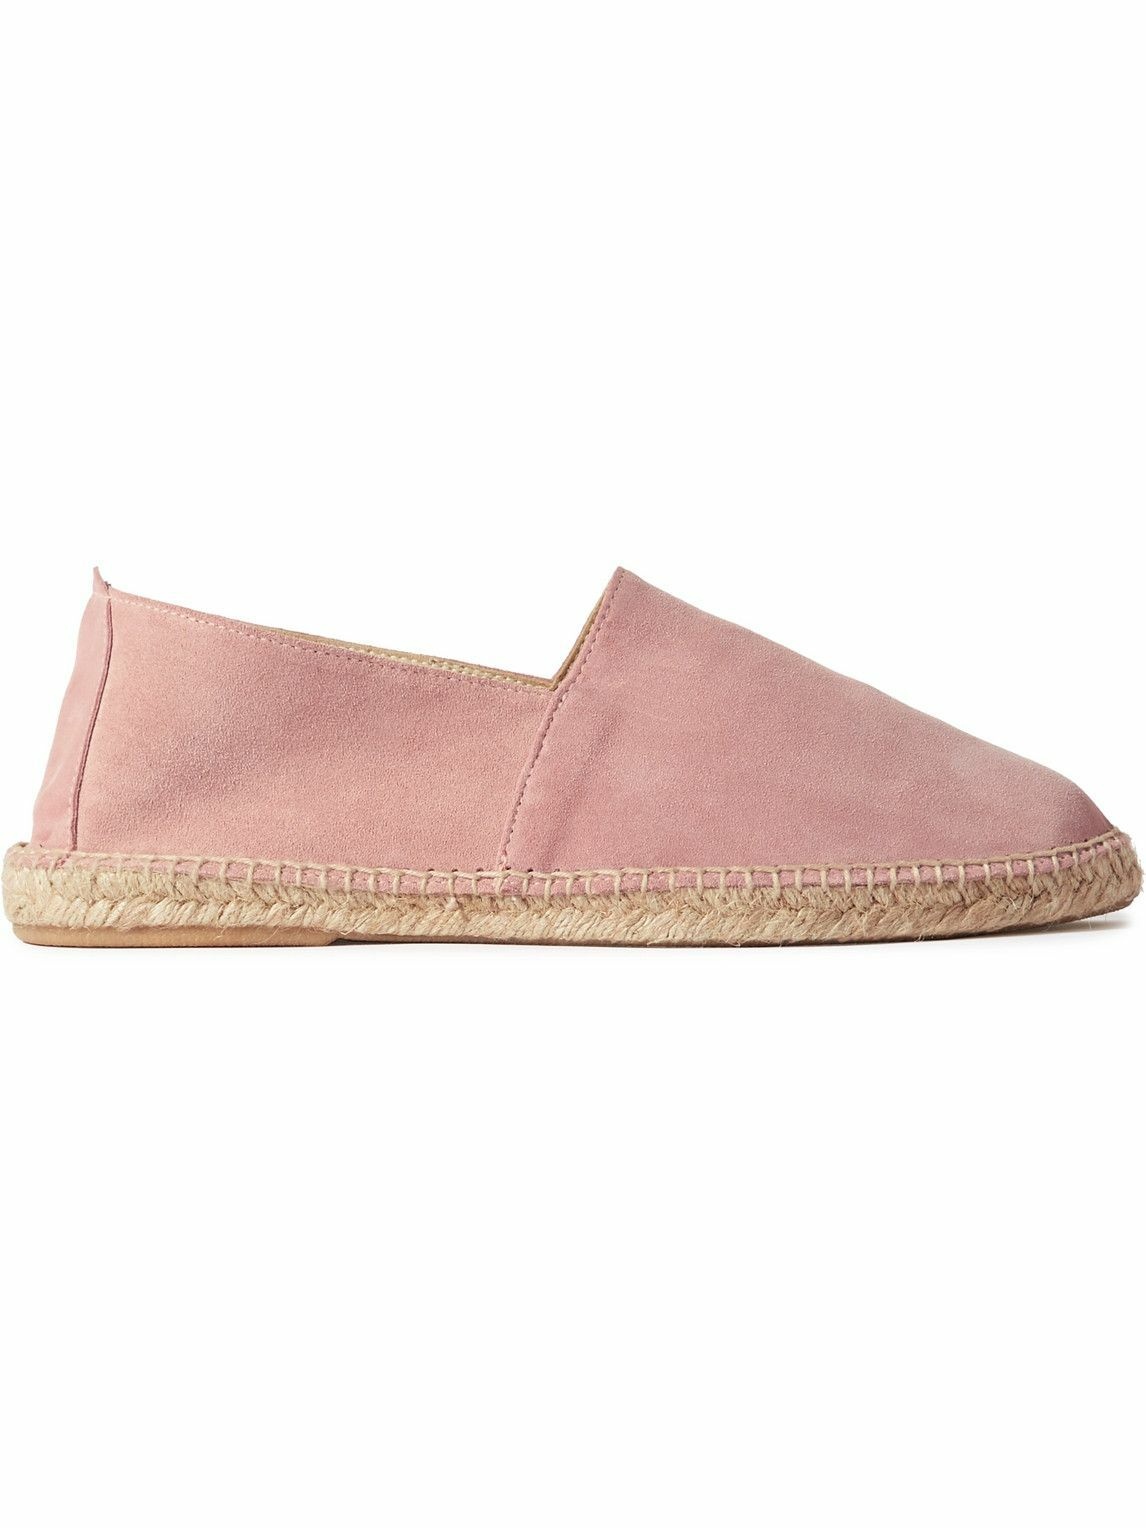 Photo: Anderson & Sheppard - Suede Espadrilles - Pink